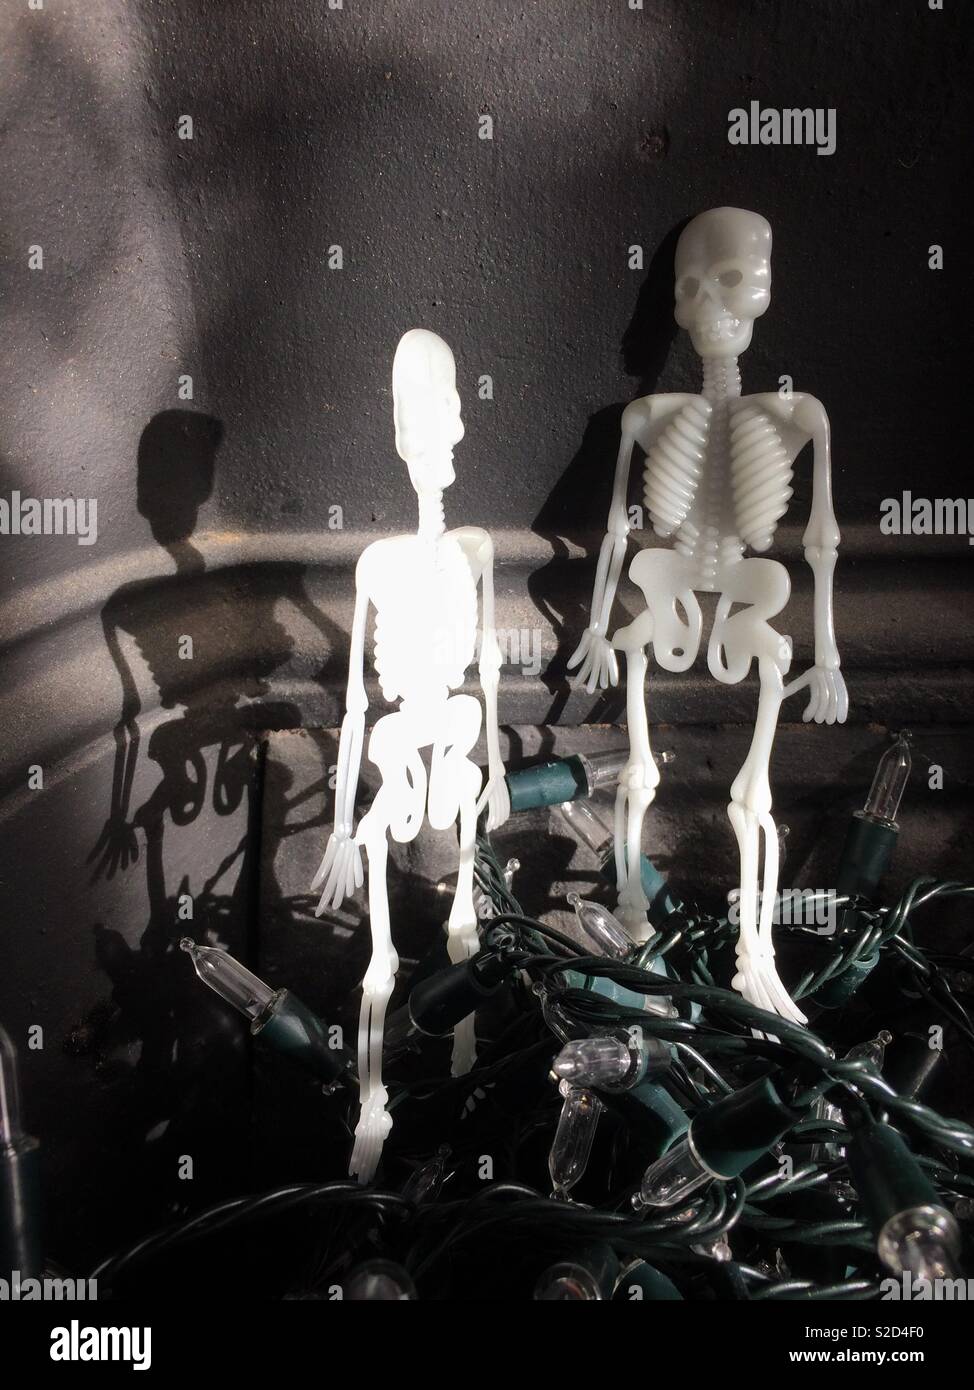 Toy plastic skeletons propped up on top of a mound of fairy lights - shadowy almost monochrome image Stock Photo